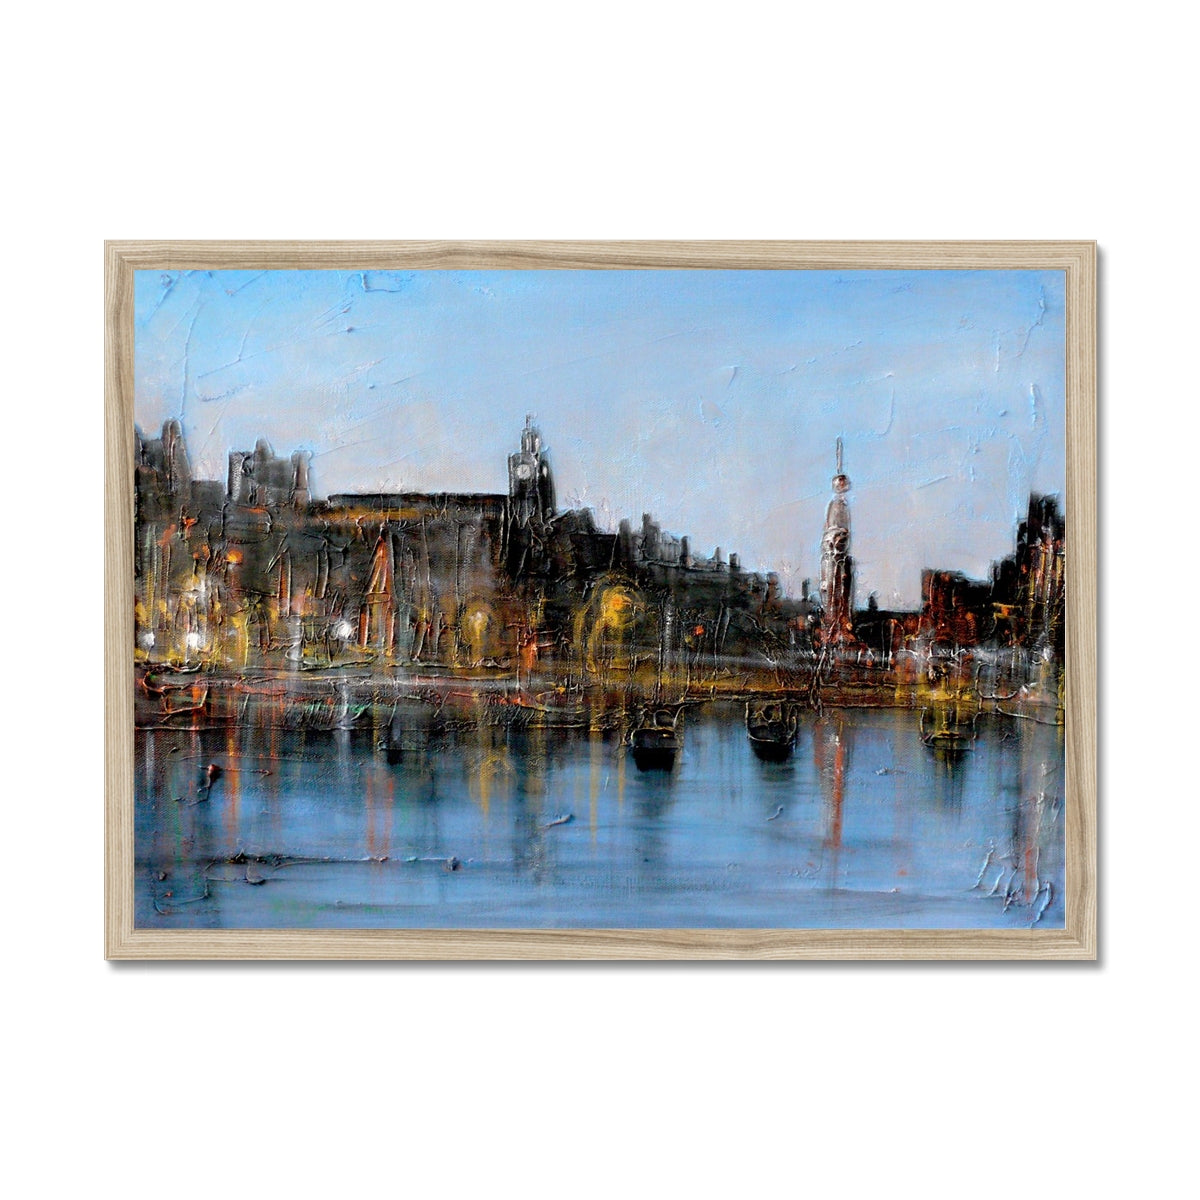 Winter In Amsterdam Painting | Framed Prints From Scotland-Framed Prints-World Art Gallery-A2 Landscape-Natural Frame-Paintings, Prints, Homeware, Art Gifts From Scotland By Scottish Artist Kevin Hunter